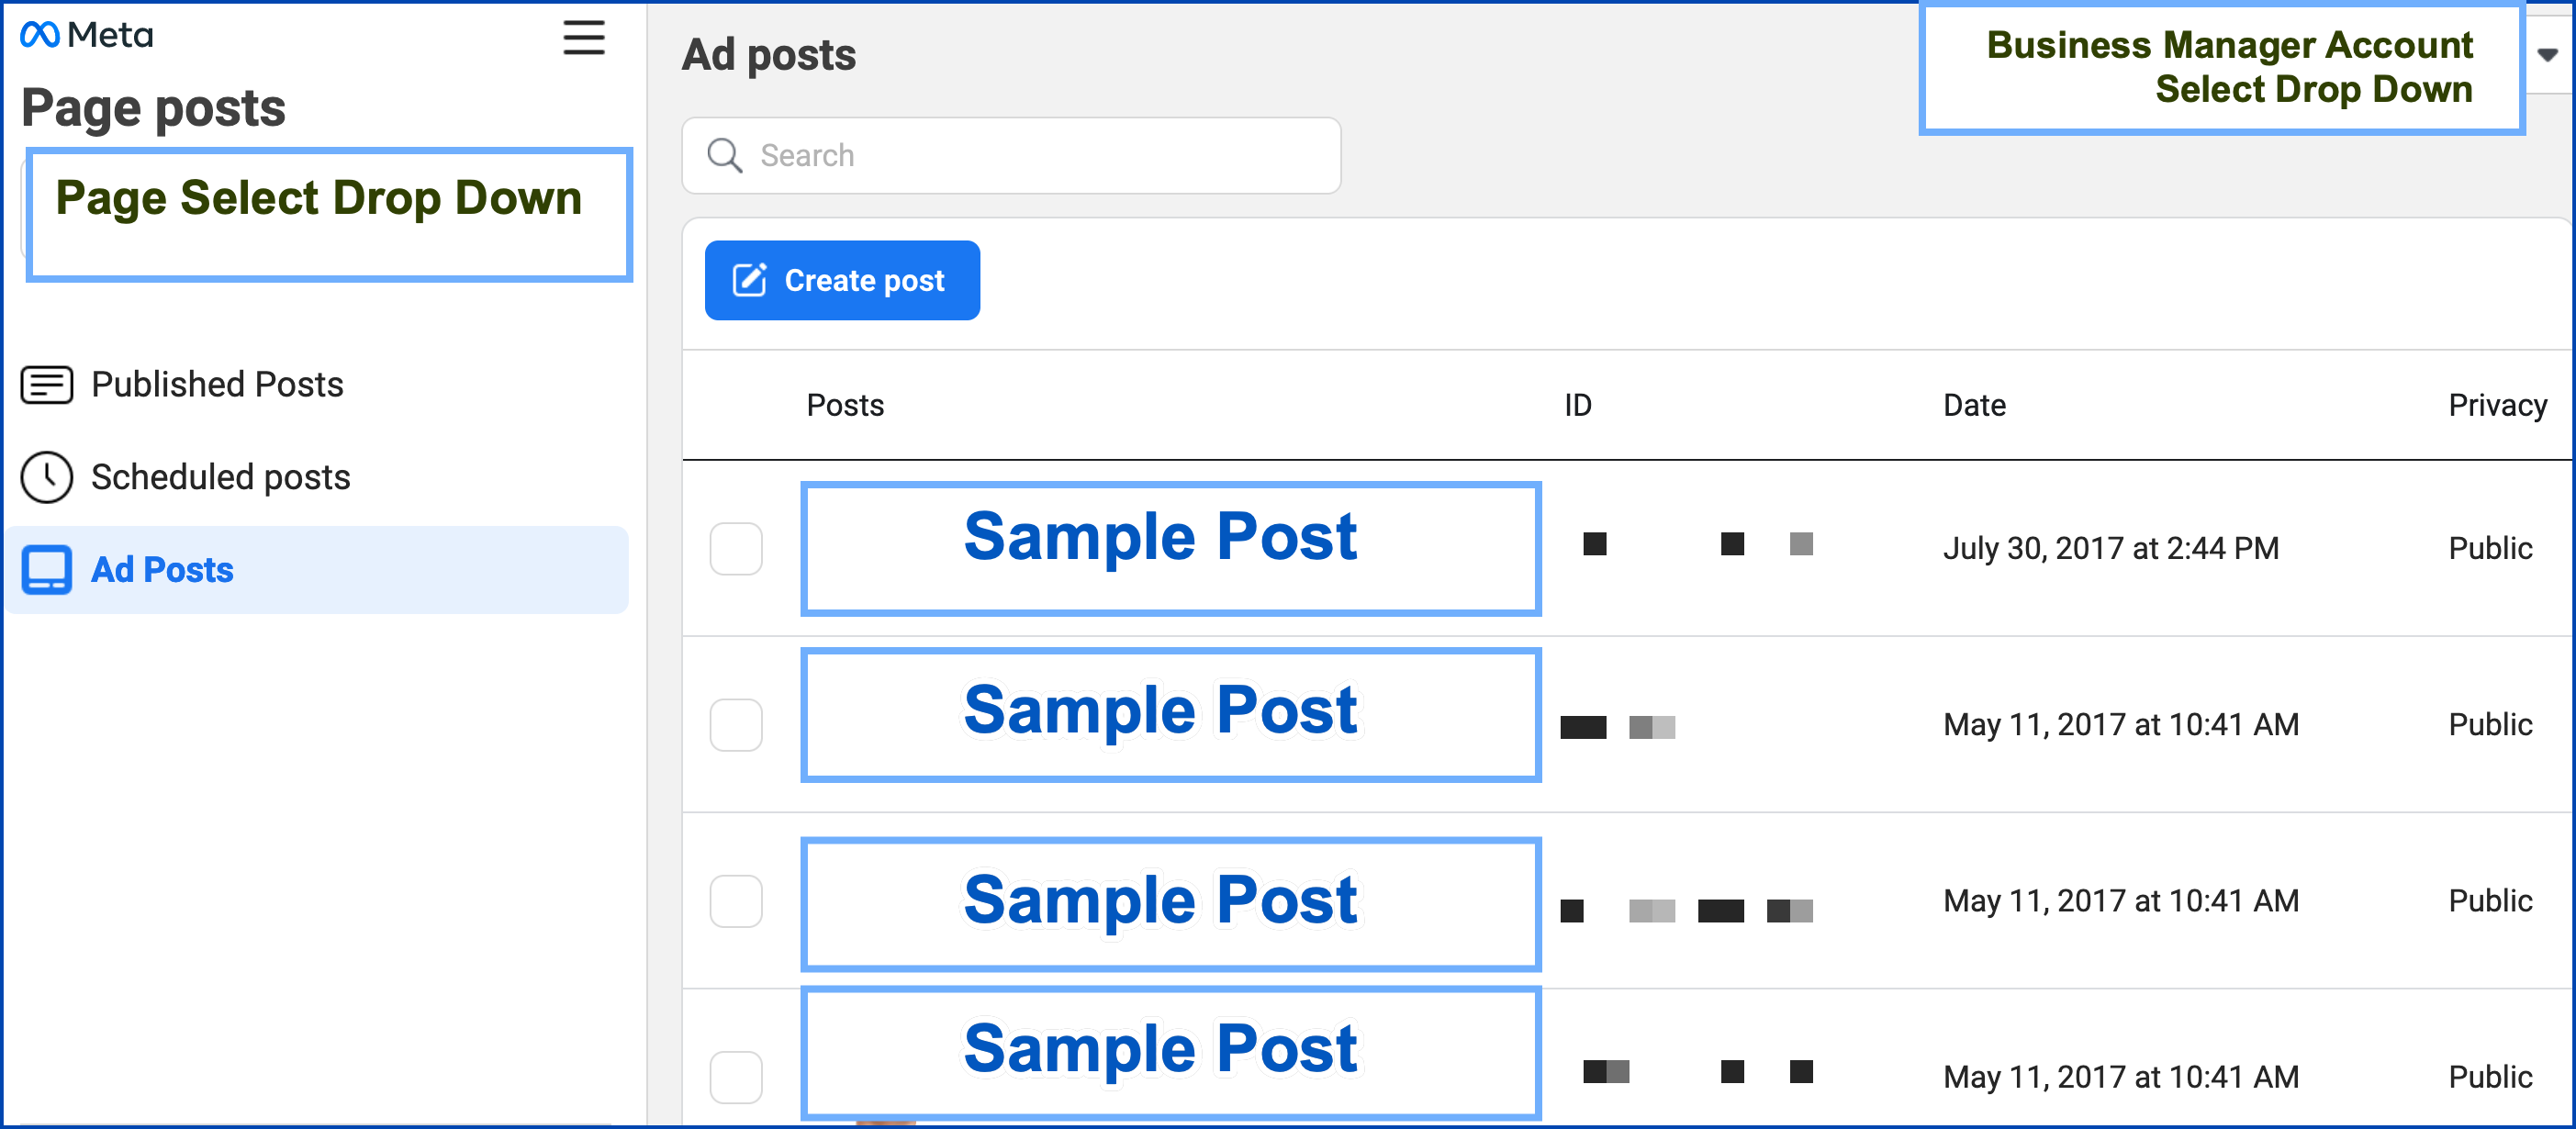 Image shows an example from the Page Posts screen. On the far left are options for "Published posts", "Scheduled posts", and "Ads posts" - with Ads Posts selected. The image highlights a page selector on the top left, and a Business Manager account selector on the top right. 